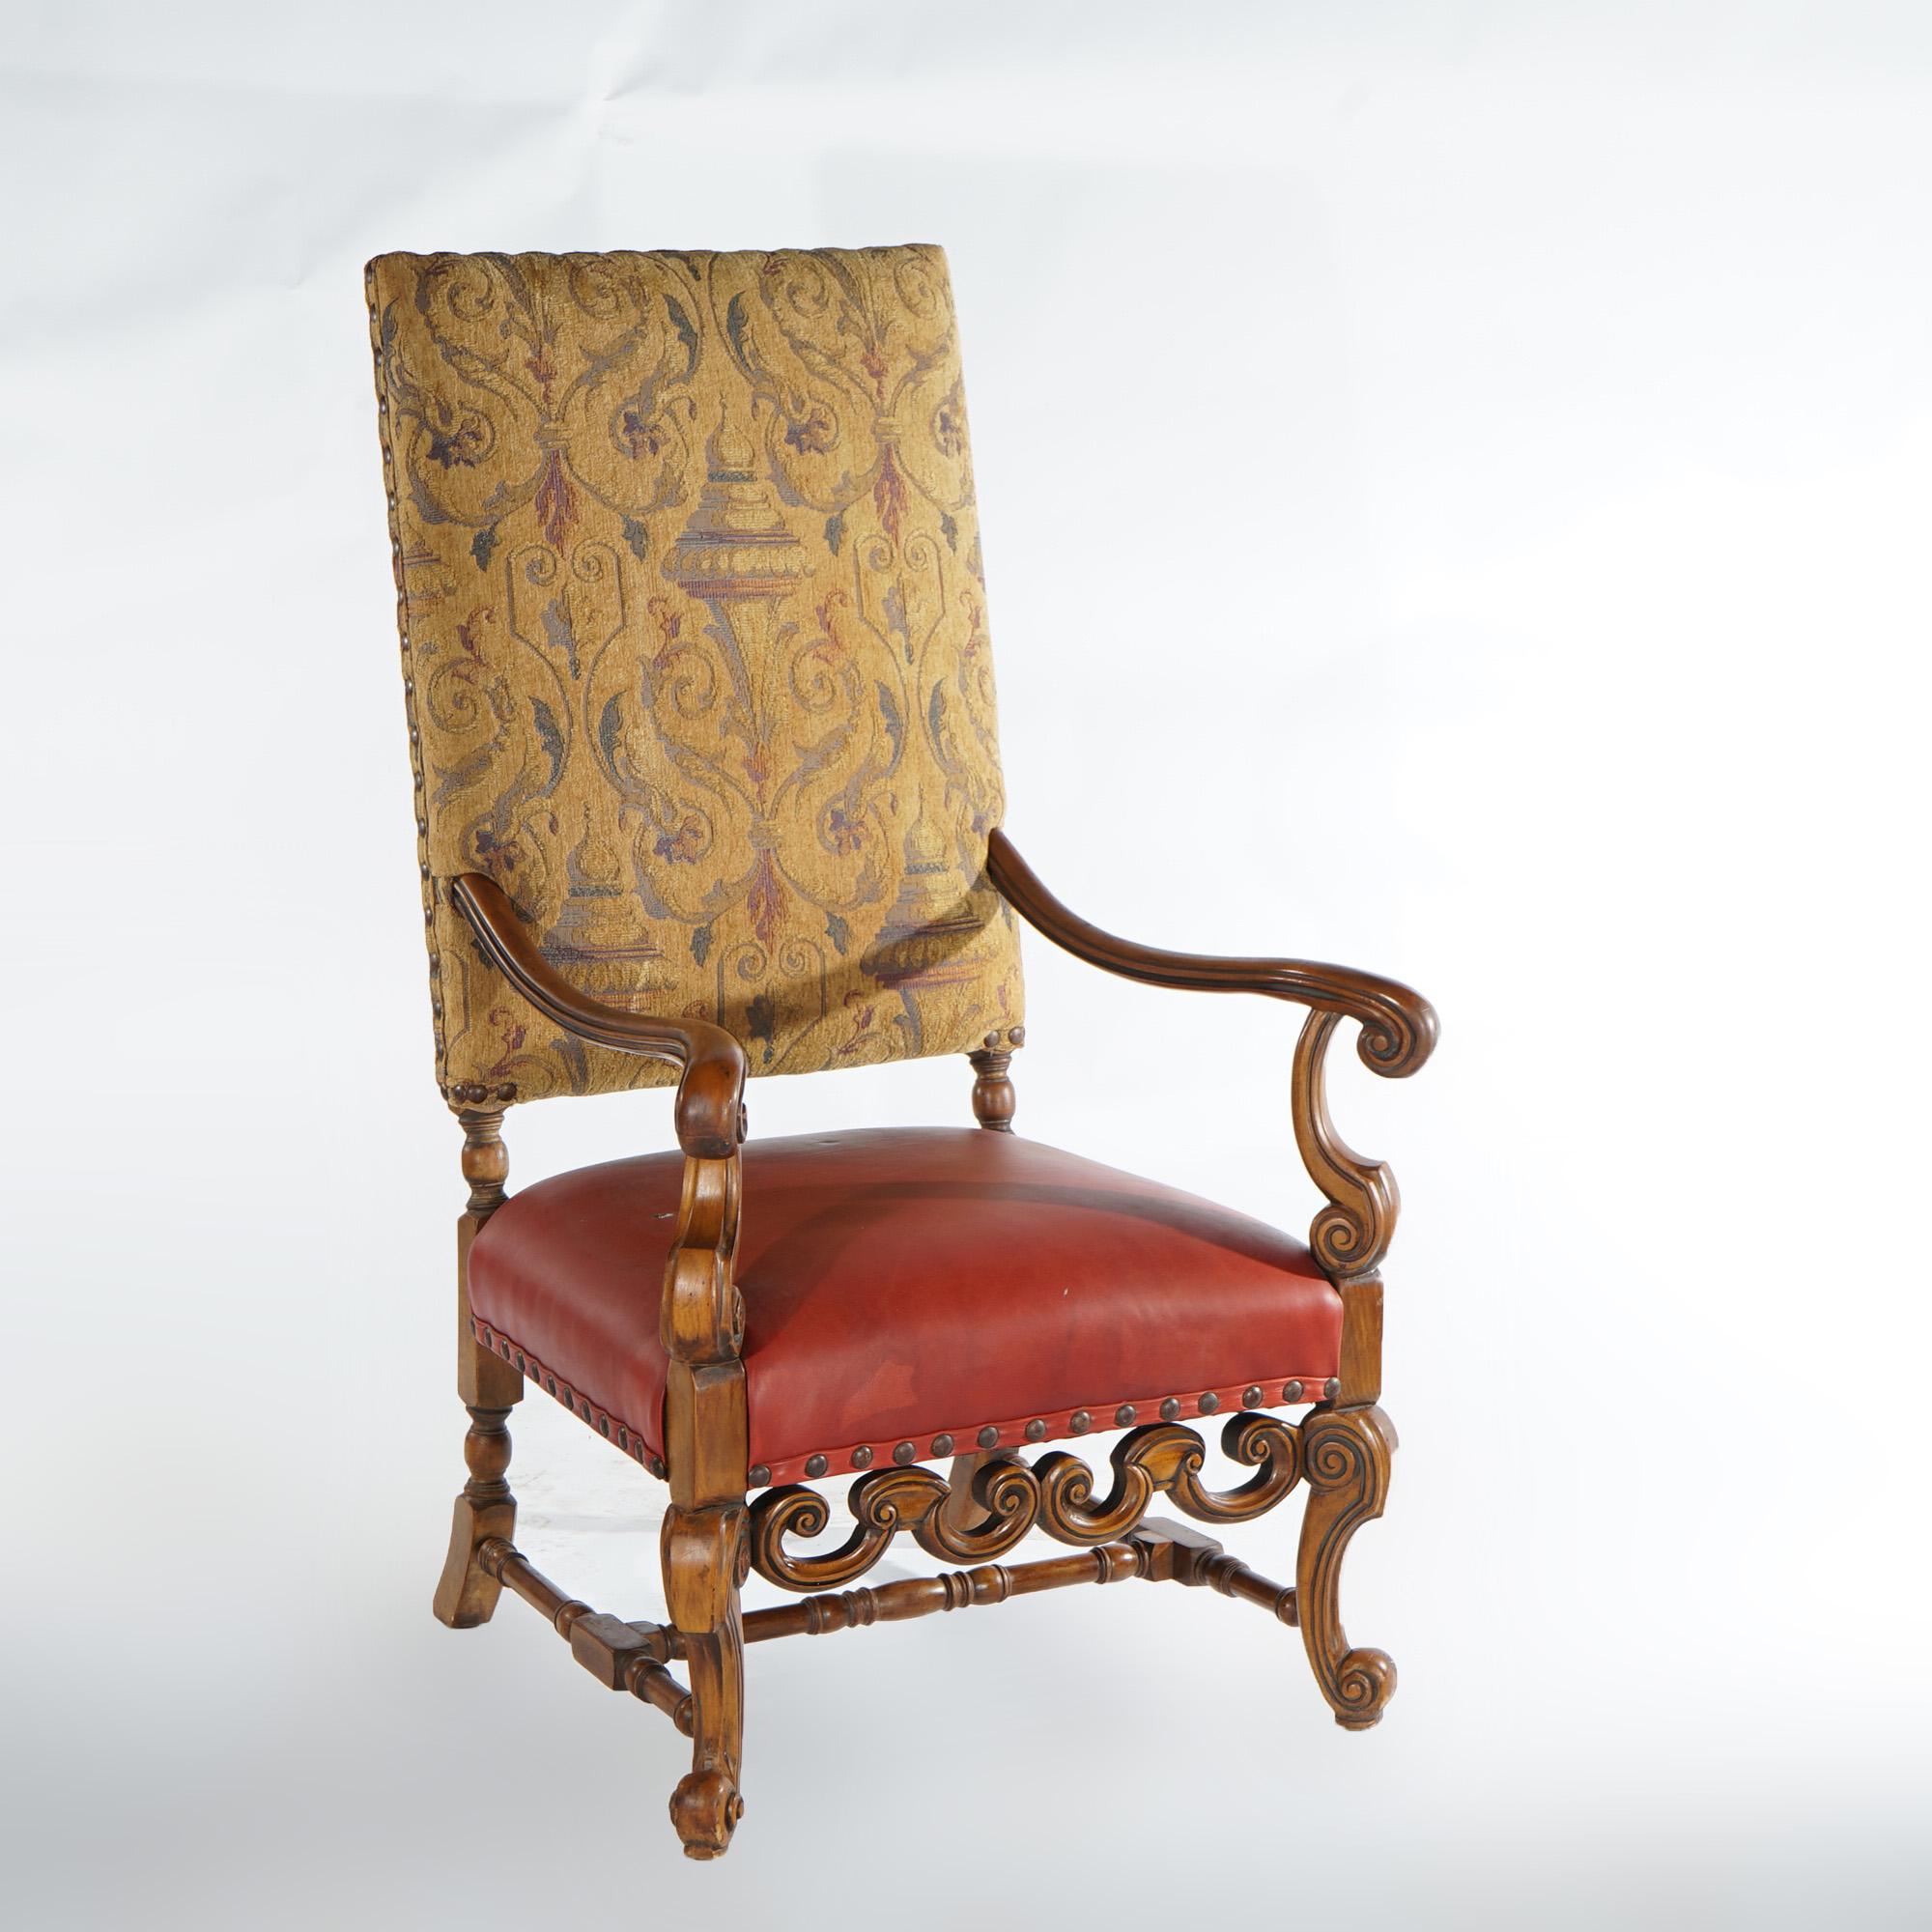 An antique pair of Continental Baroque throne chairs offer walnut frames with high upholstered backs, carved scroll form arms, aprons and legs, c1920

Measure - 52